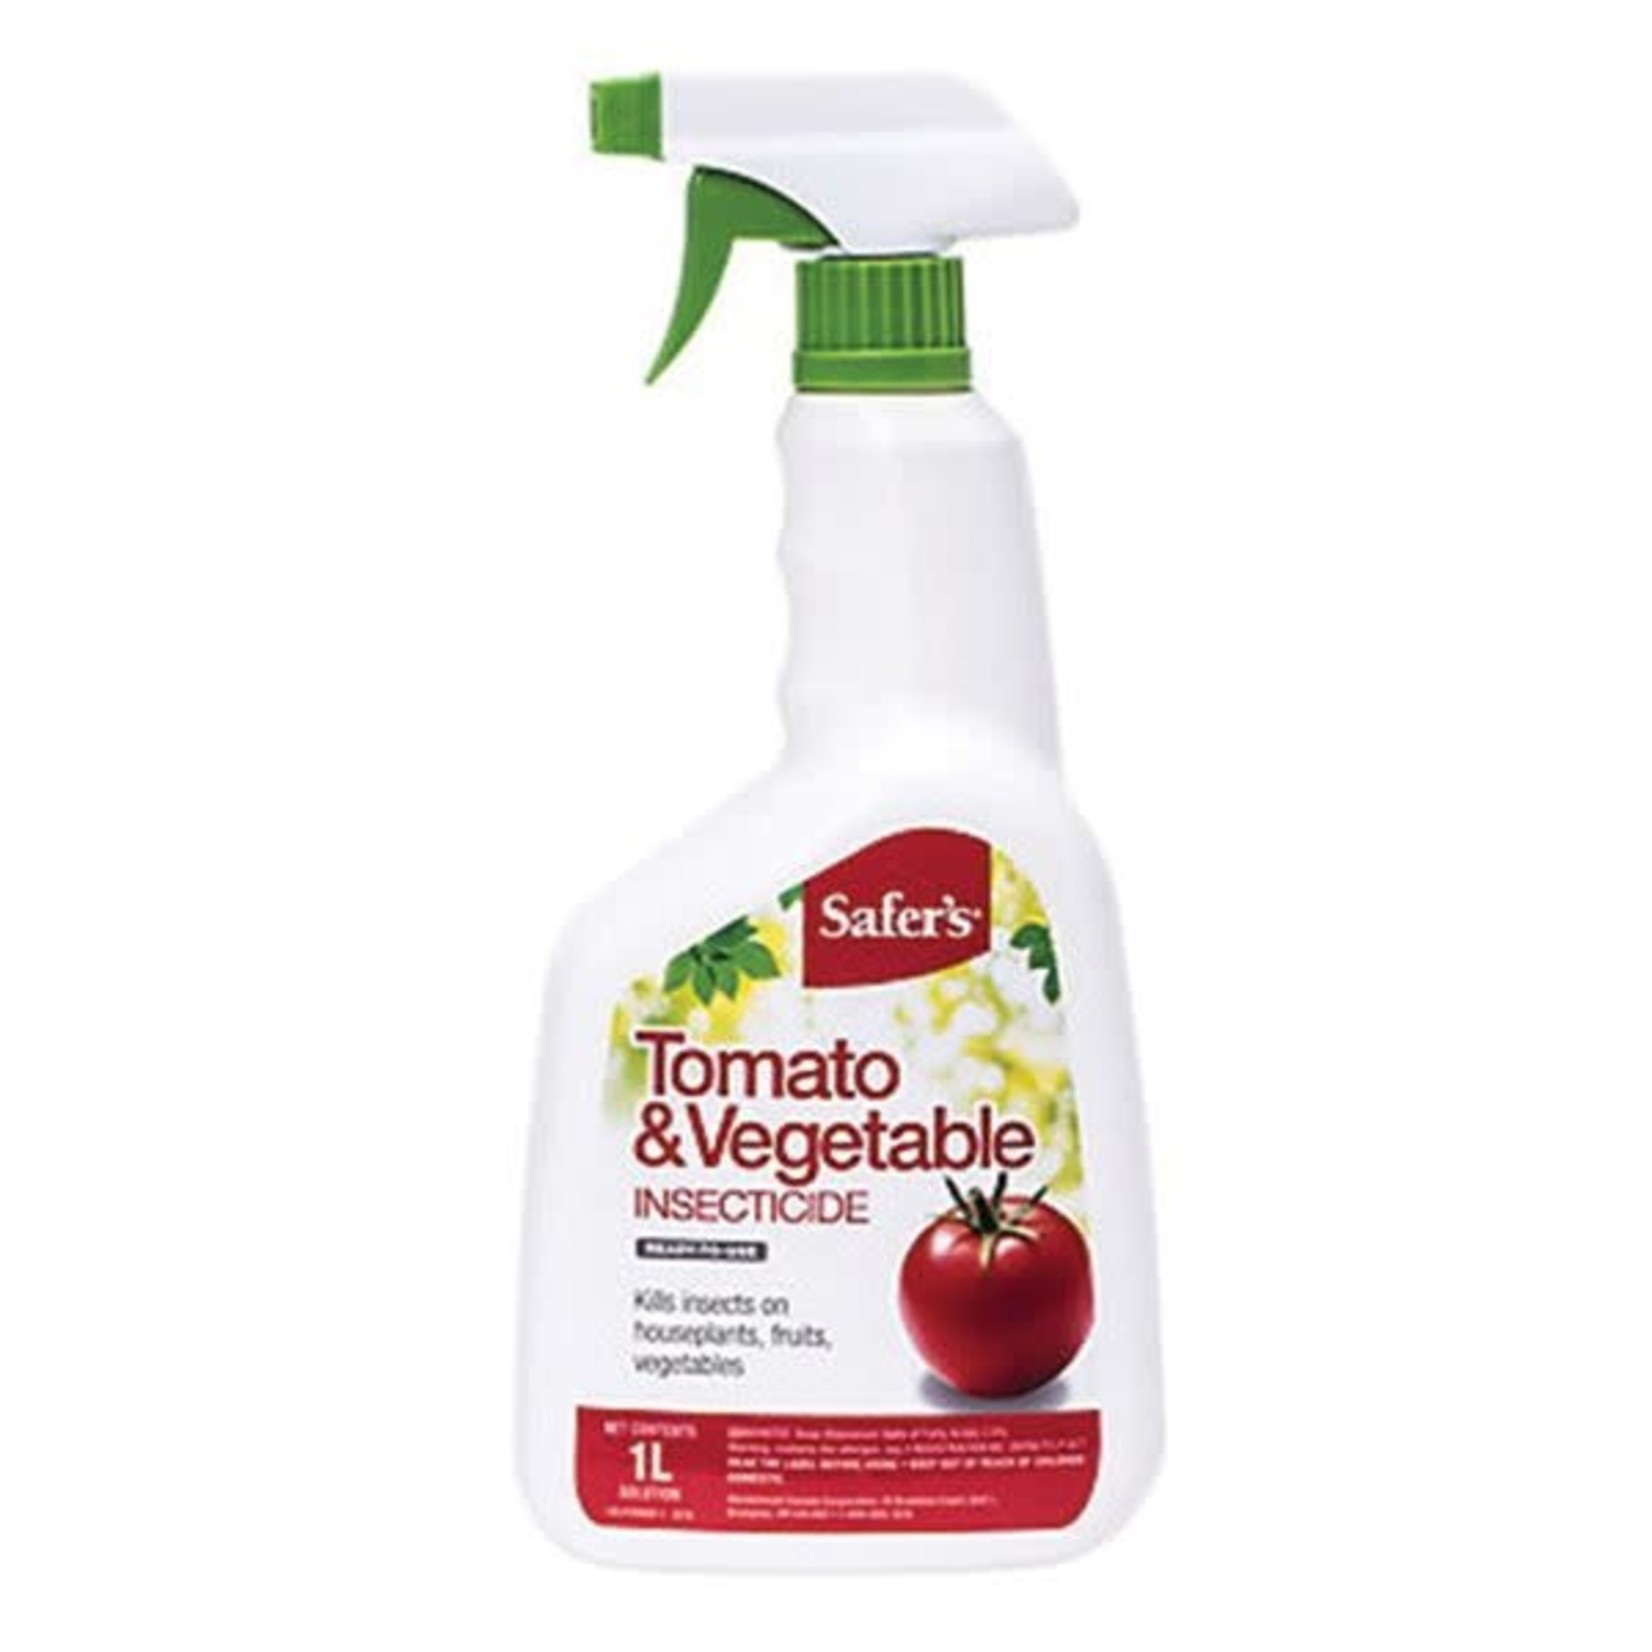 Safers Safers Tomato & Vegetable Insecticide 1L